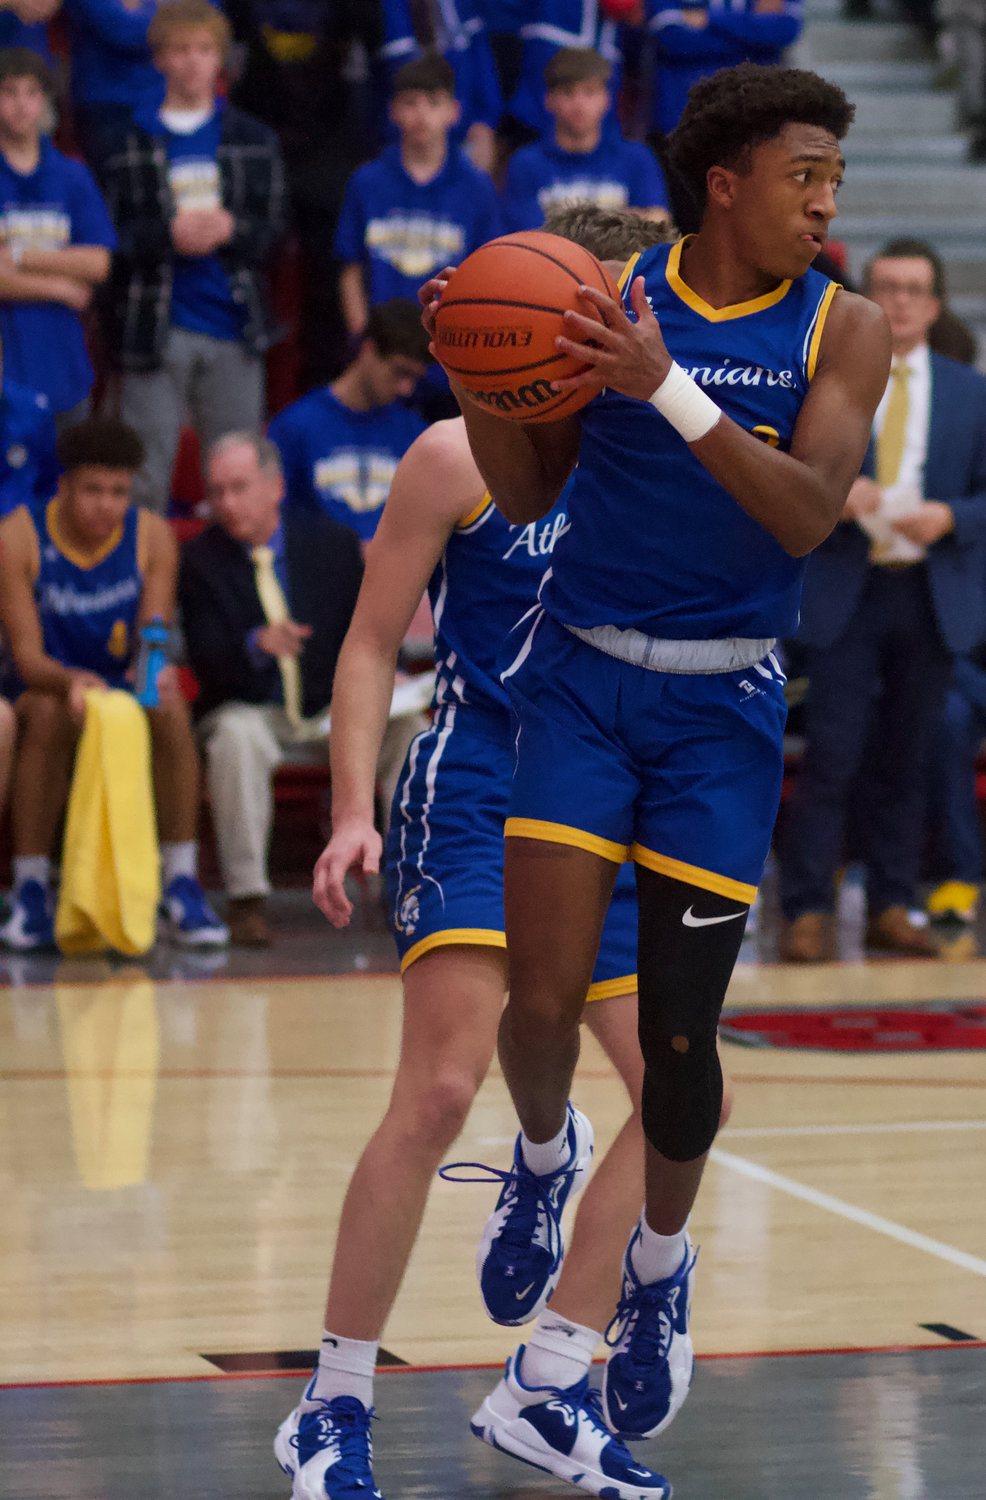 Ziair Morgan was one of the leading scorers for Crawfordsville with 7 points.